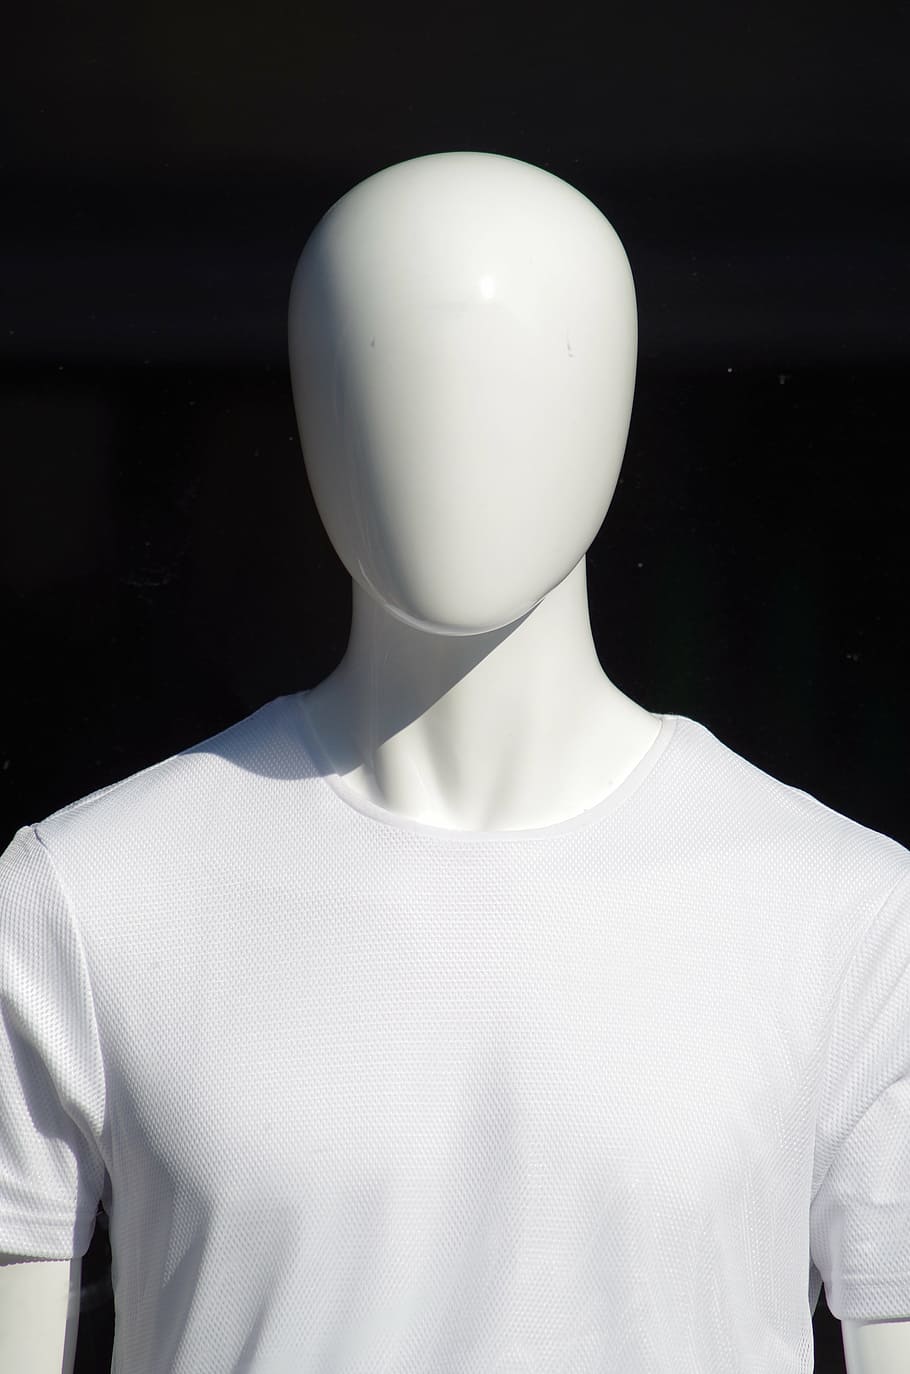 mannequin wearing white shirt, male, dummy, fashion, store, display